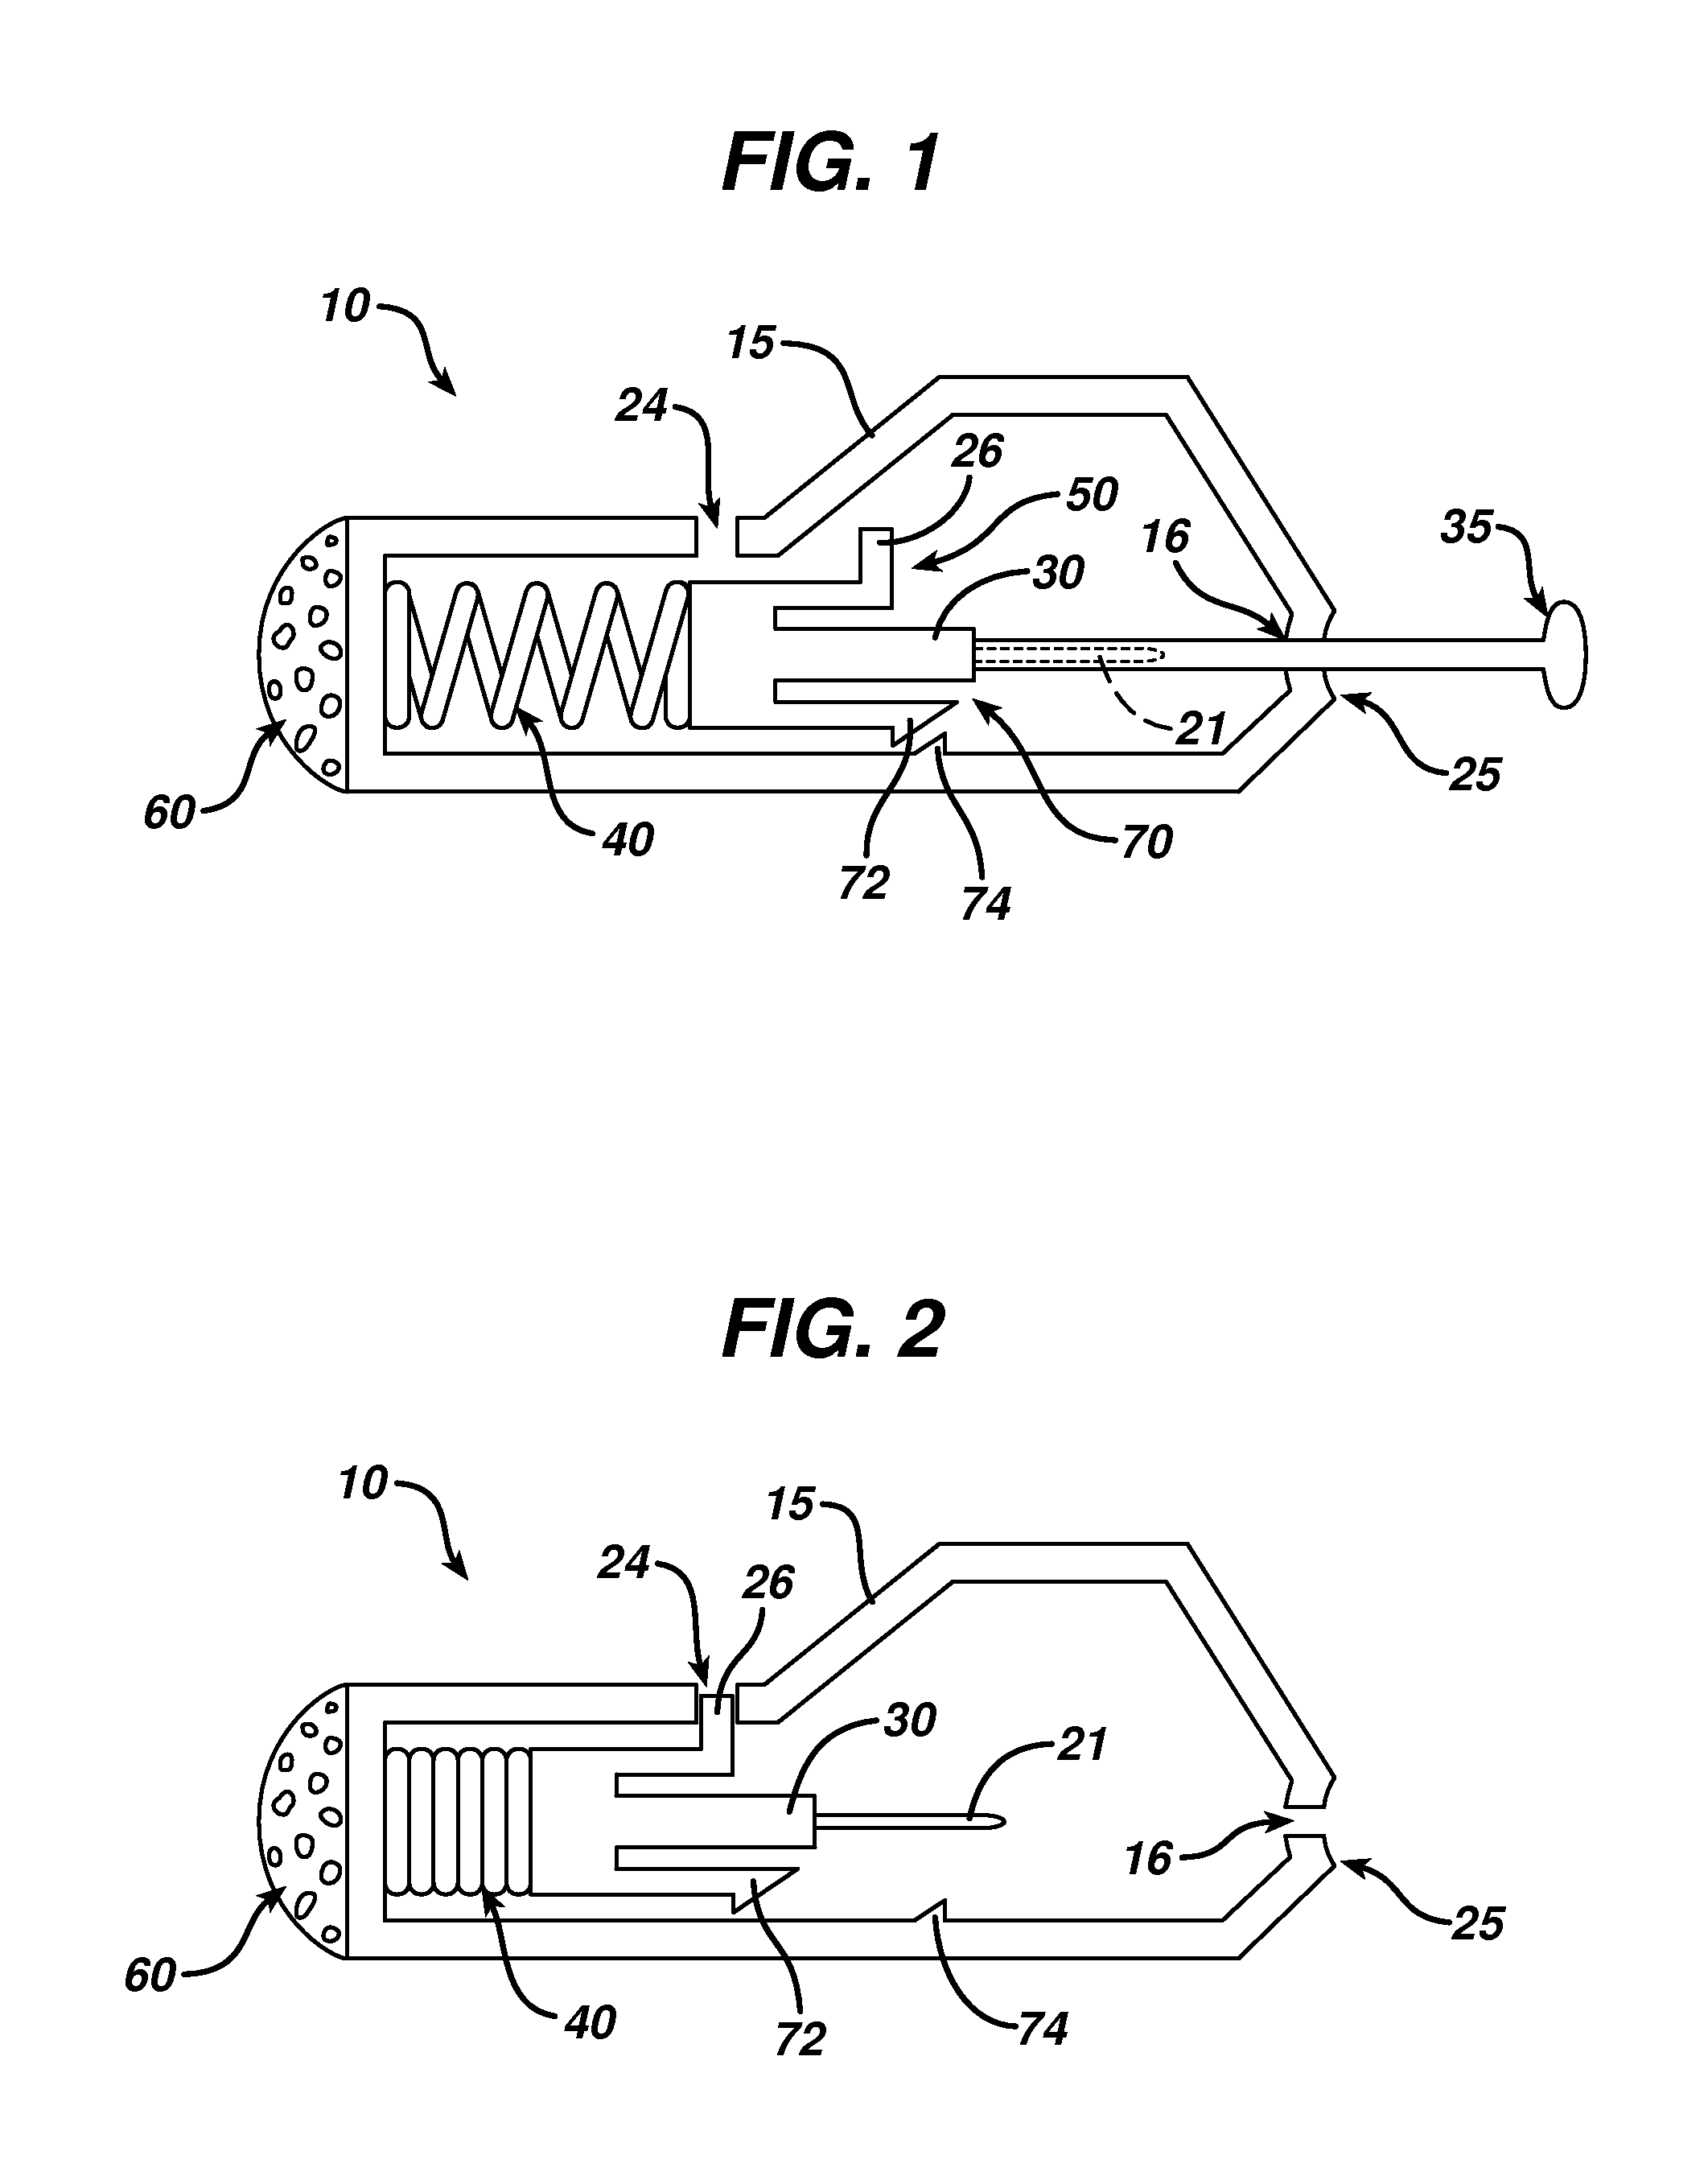 Skin-piercing device for treatment of acne